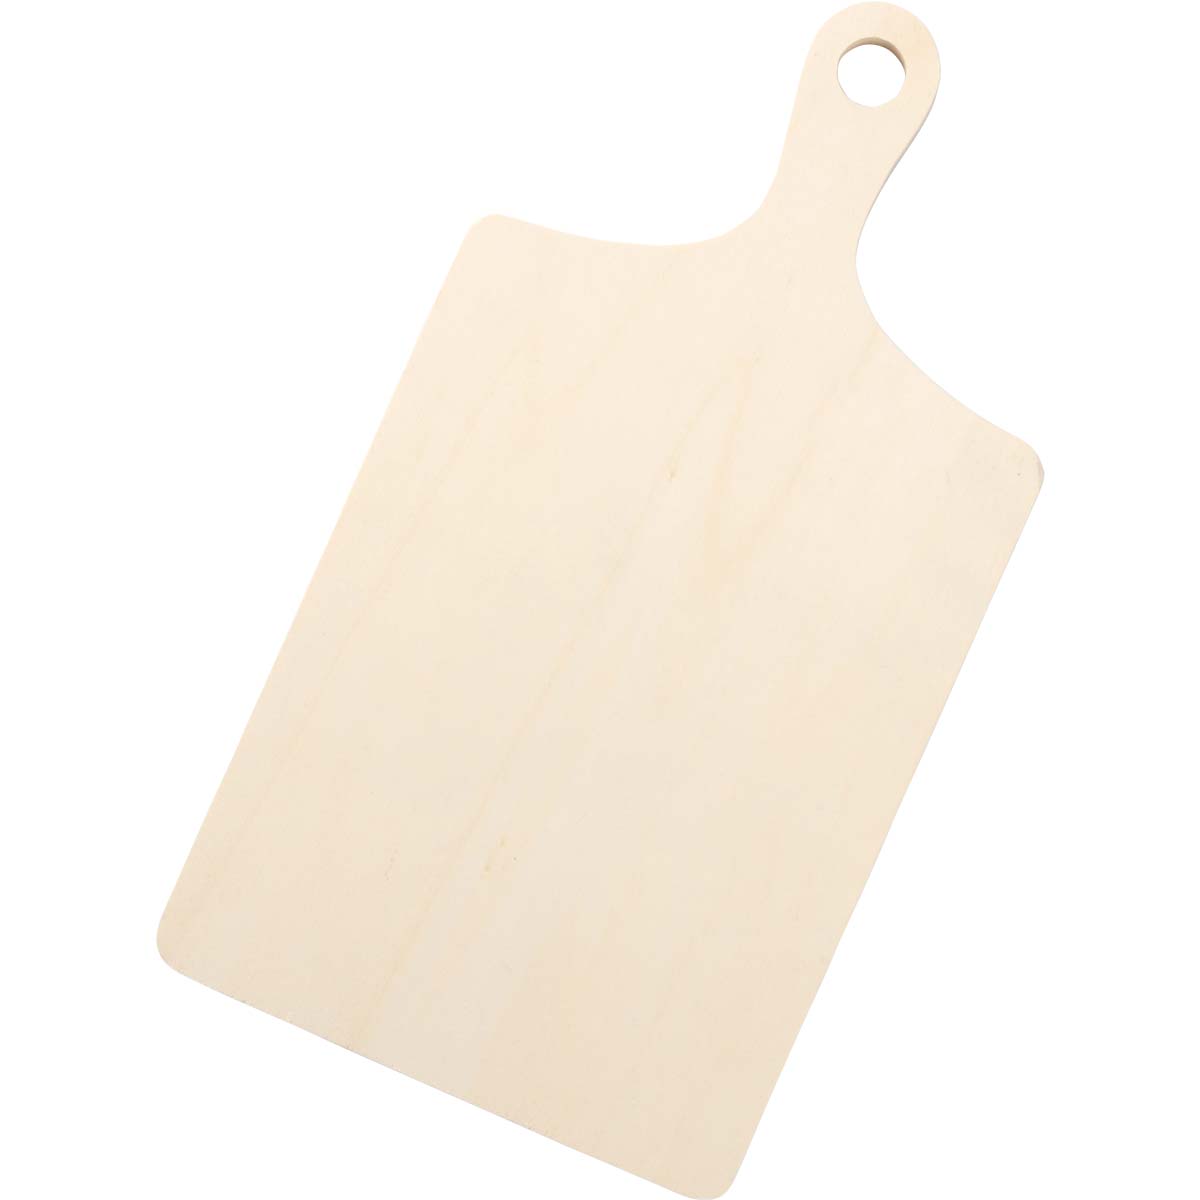 Plaid Wood Surfaces - Cutting Board Long Grip Handle - 56706